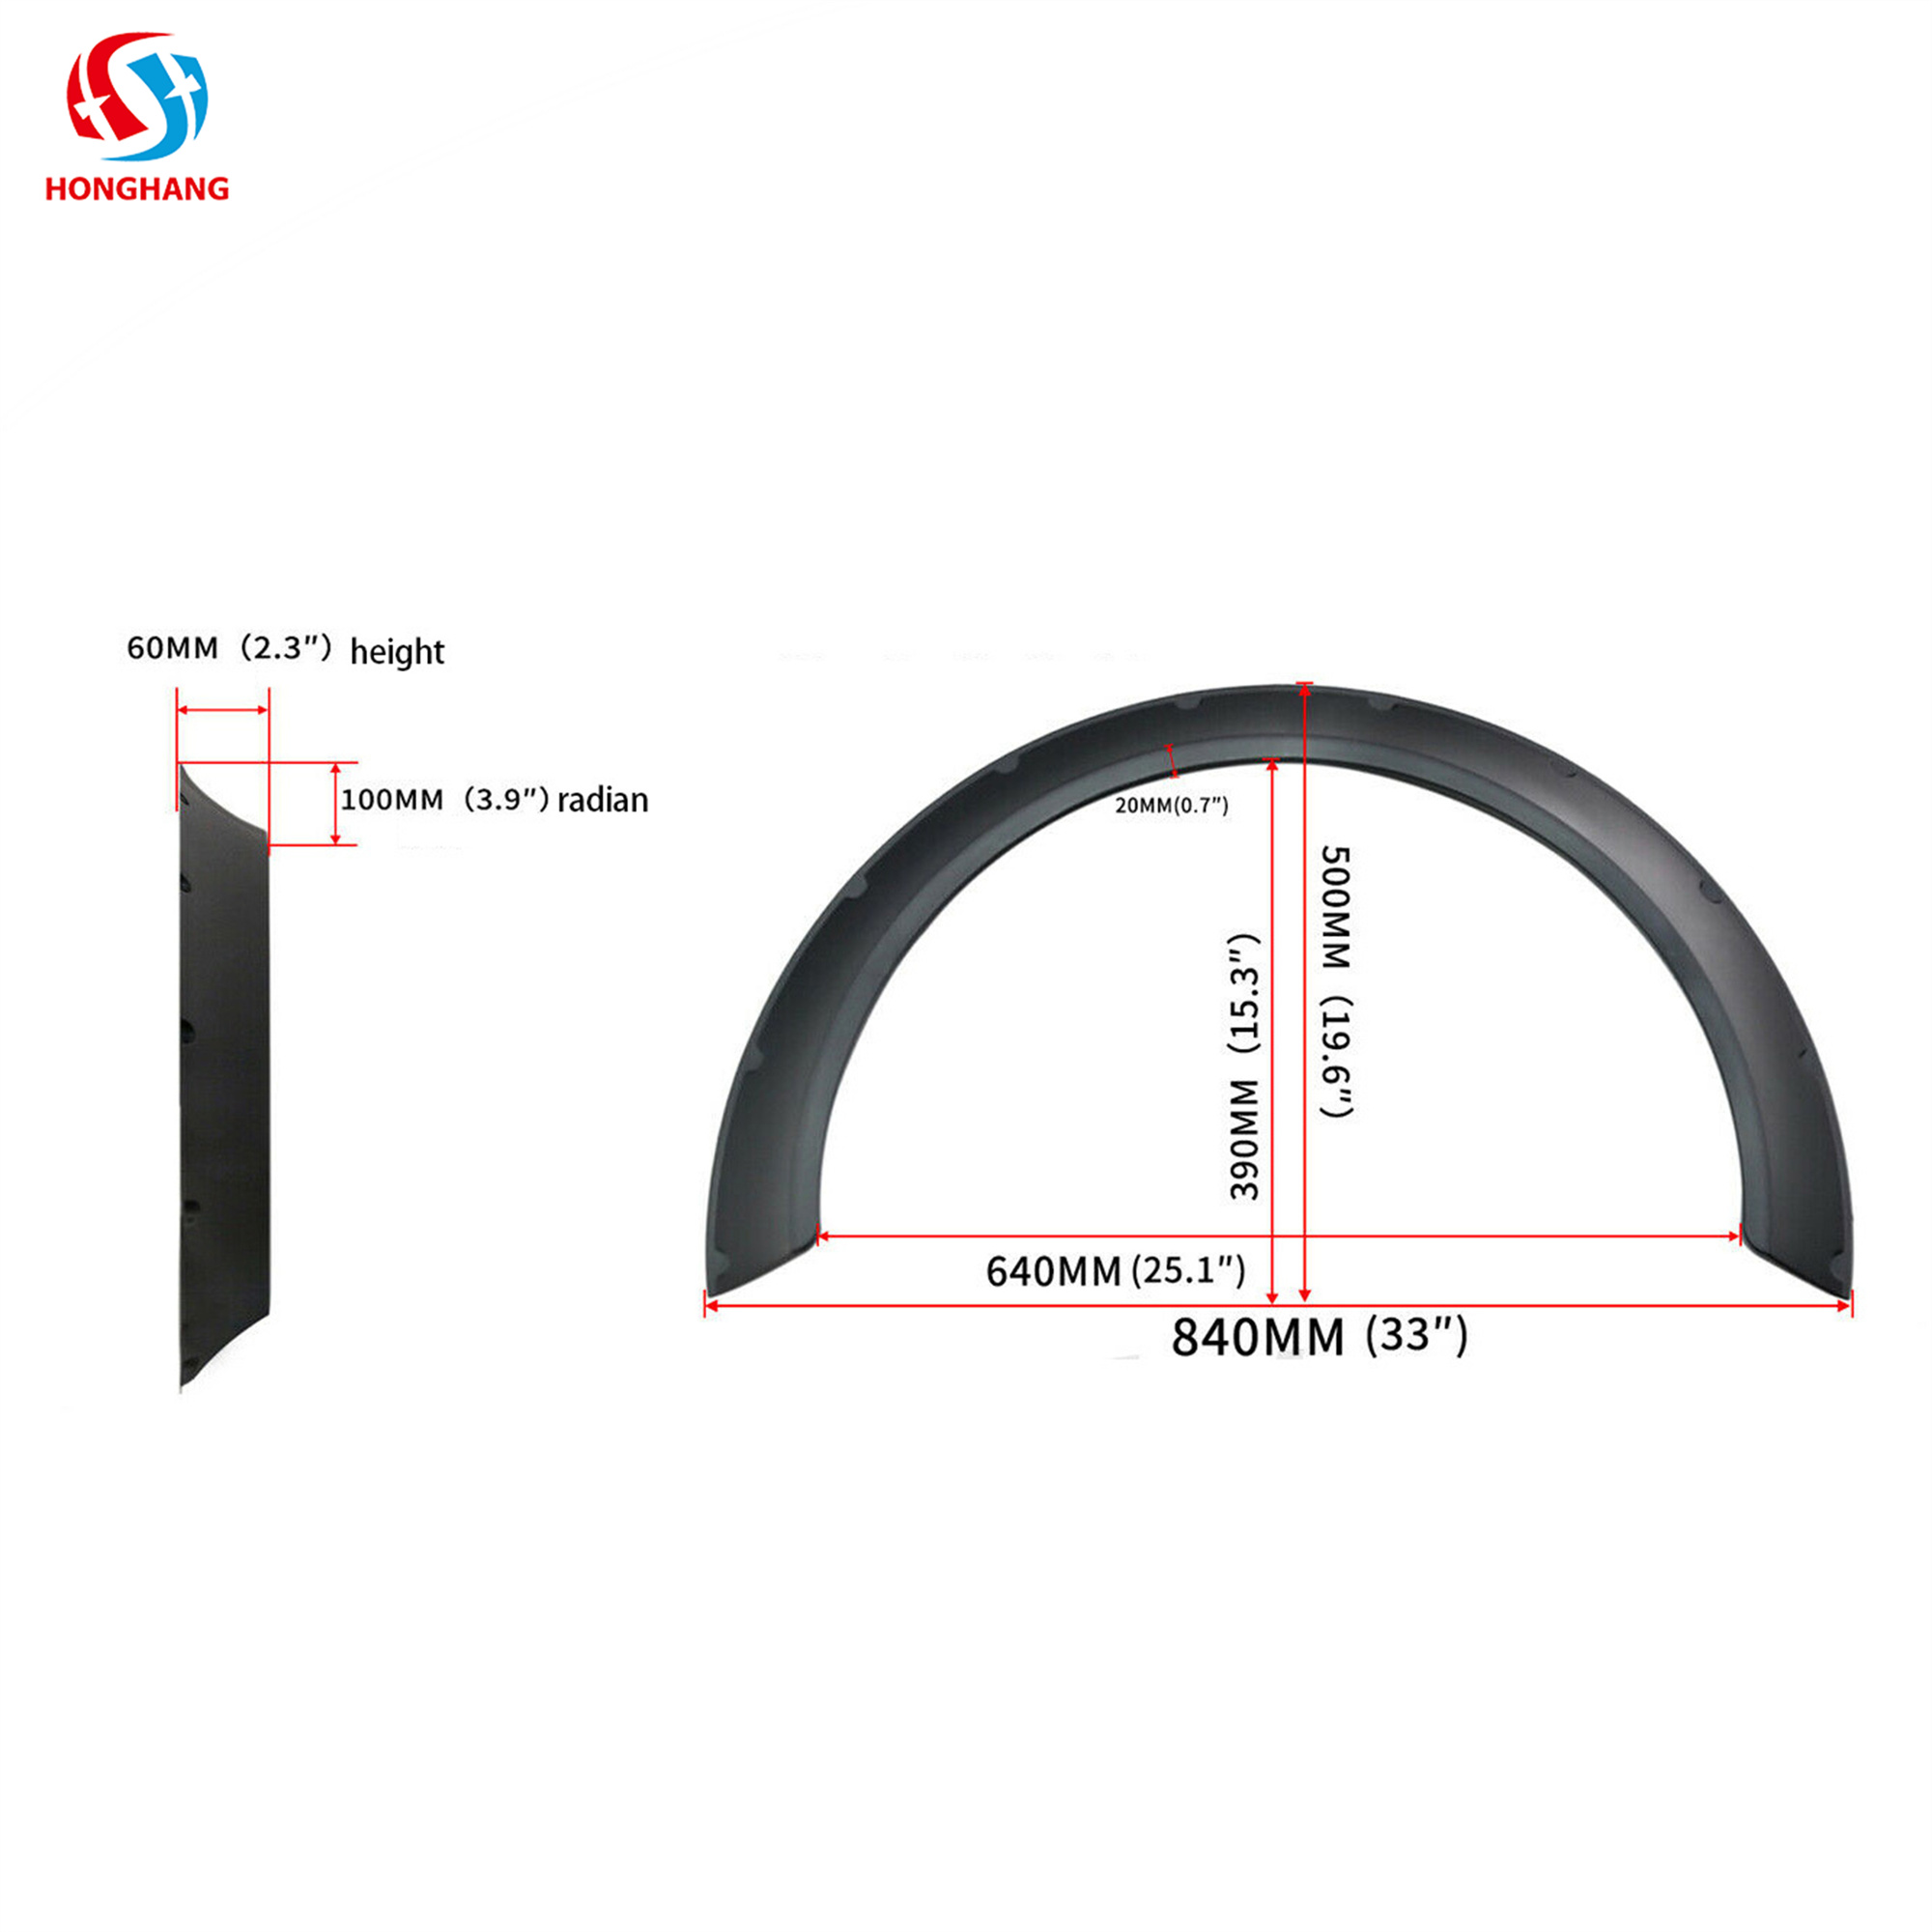 Type B 4pcs/set Big Size Universal Fender Flares For All SUV Cars 